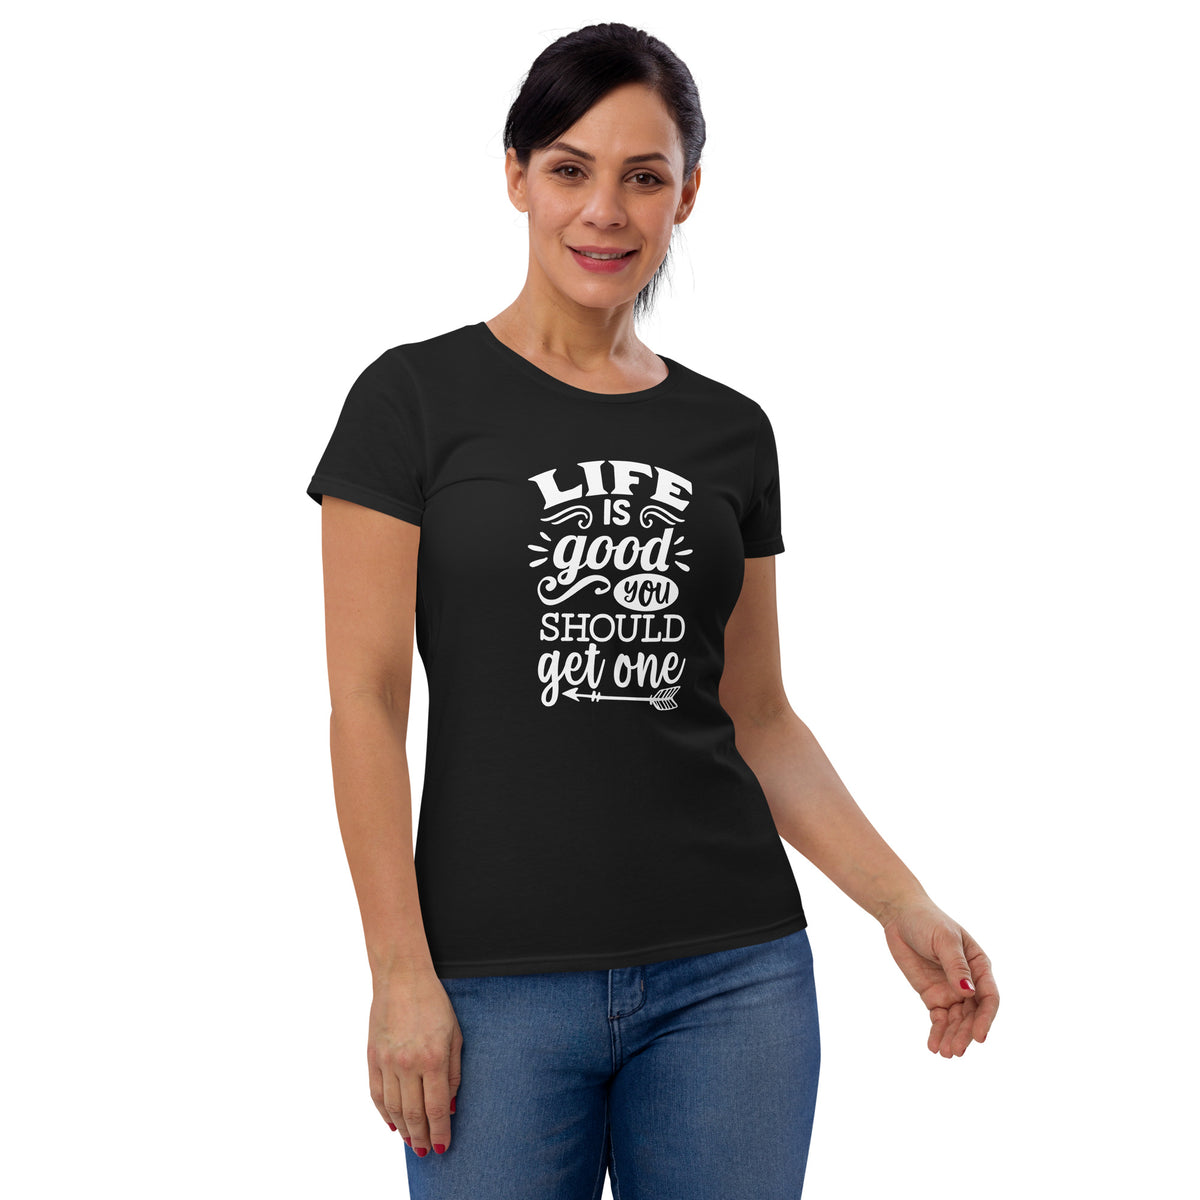 Life Is Good You Should Get One Women's Short Sleeve T-Shirt